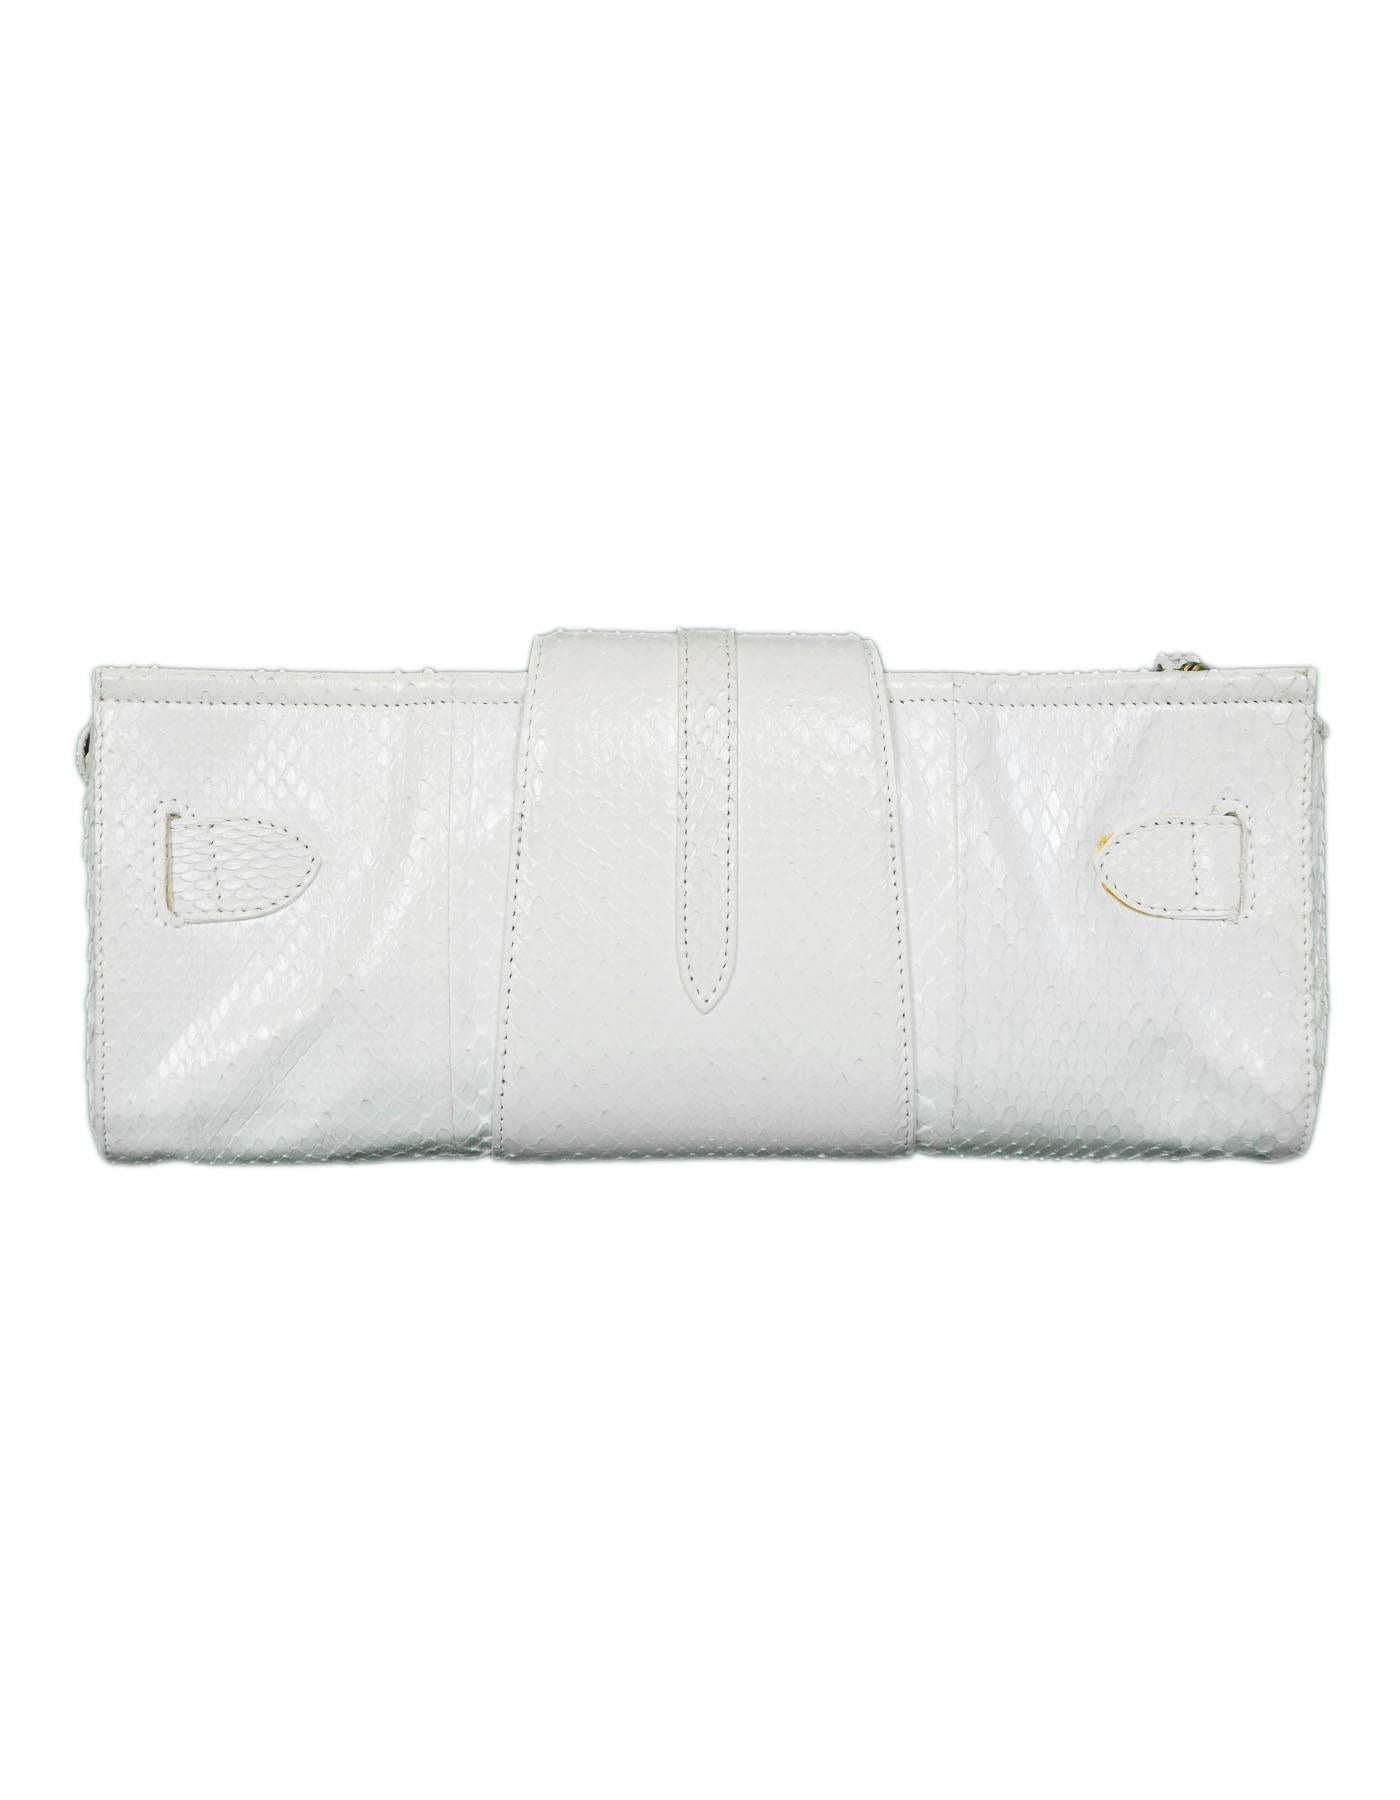 Jimmy Choo White Python Tulita Clutch

Made In: Italy
Color: White
Hardware: Goldtone
Materials: Python, metal
Lining: Tan textile
Closure/Opening: Zip top with flap and tab closure
Exterior Pockets: None
Interior Pockets: Zip wall pocket, wall